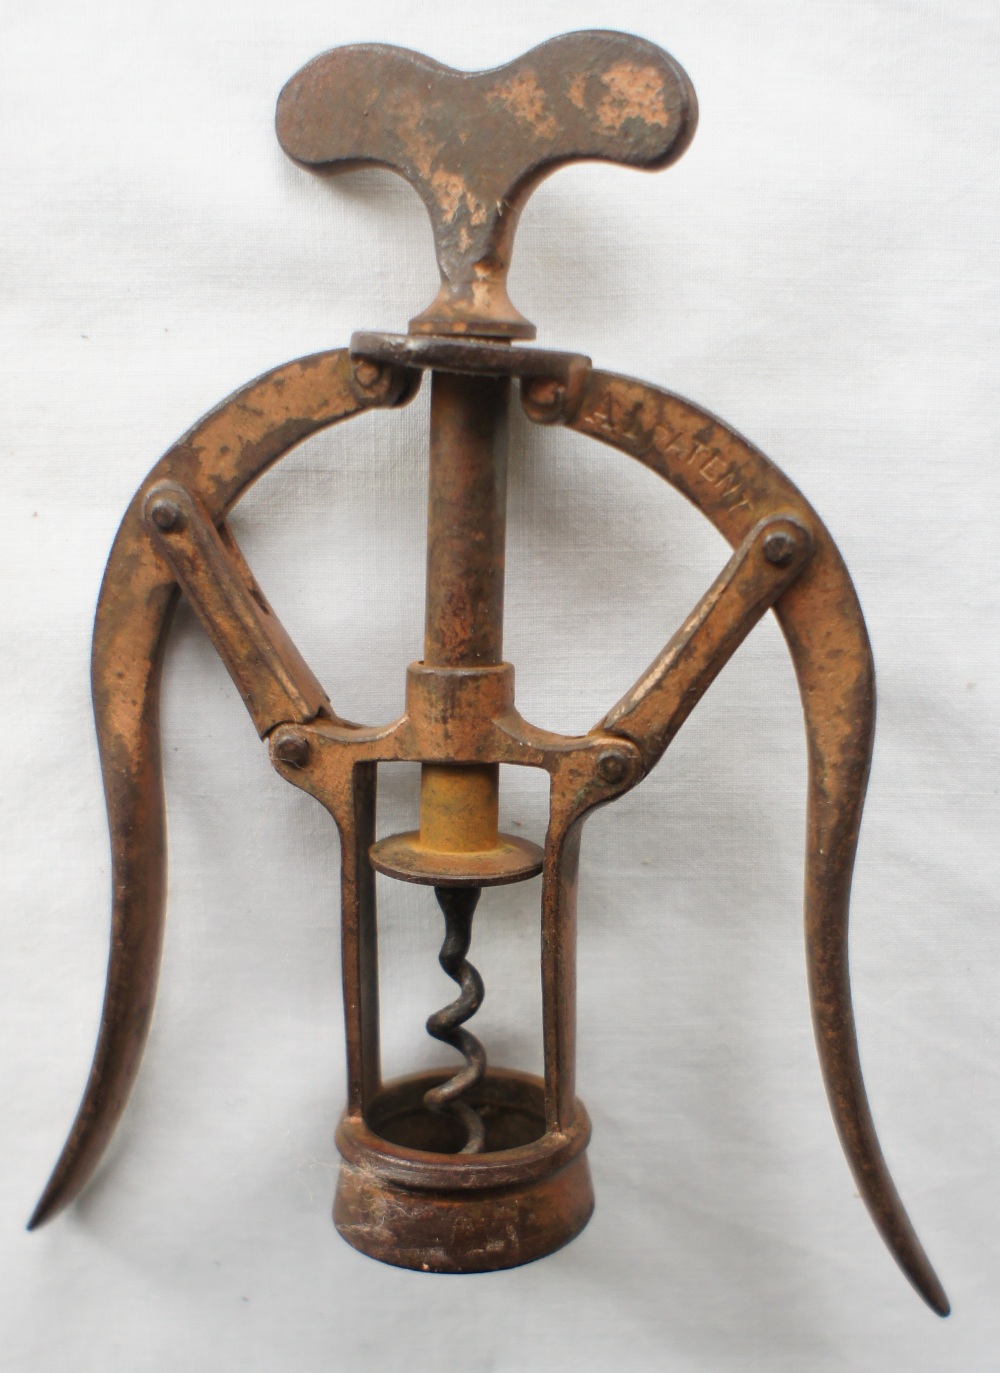 A double lever corkscrew by James Heeley & Sons, marked PATENT 6006 - Image 3 of 4